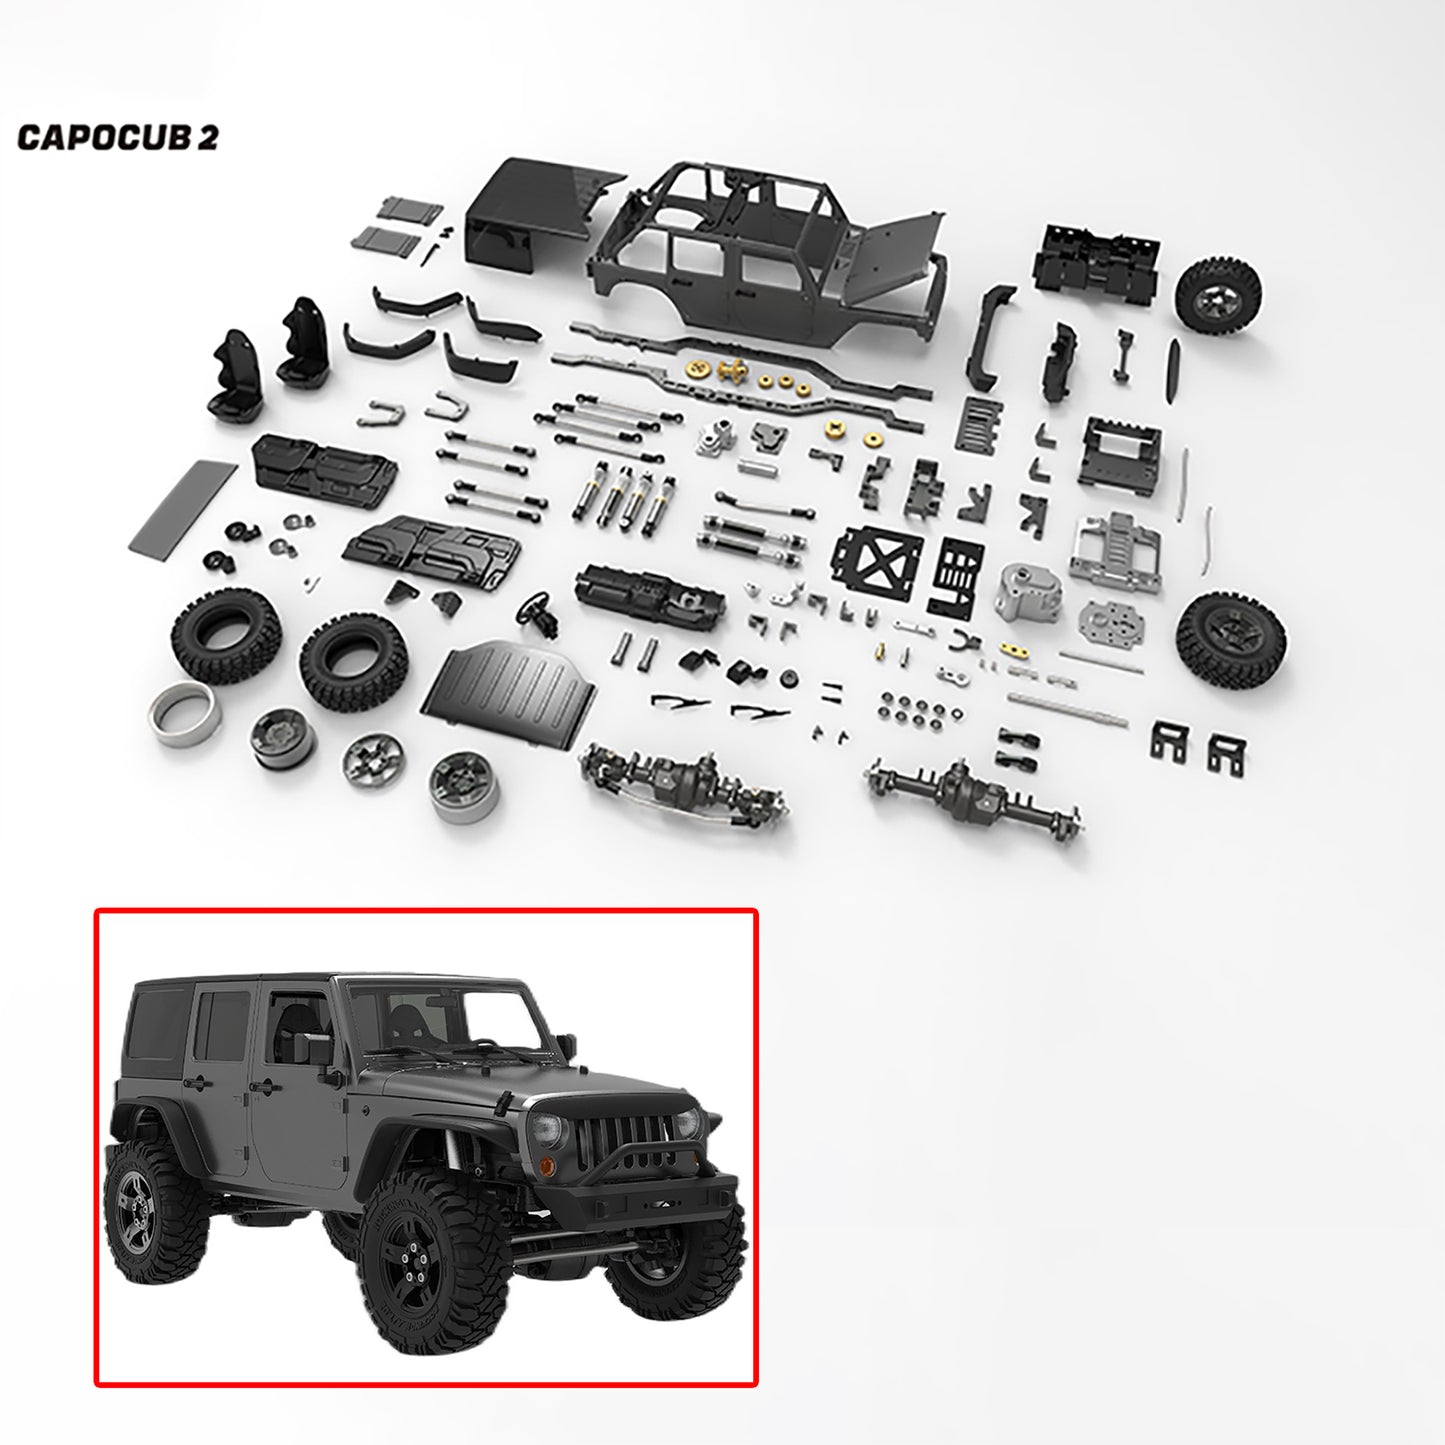 IN STOCK 1/18 CAPO Crawler Car CUB2 JK KIT DIY RC Model Plastic Unassembled Cabin Car Shell Metal Chassis W/ 2Speed Gearbox Differential